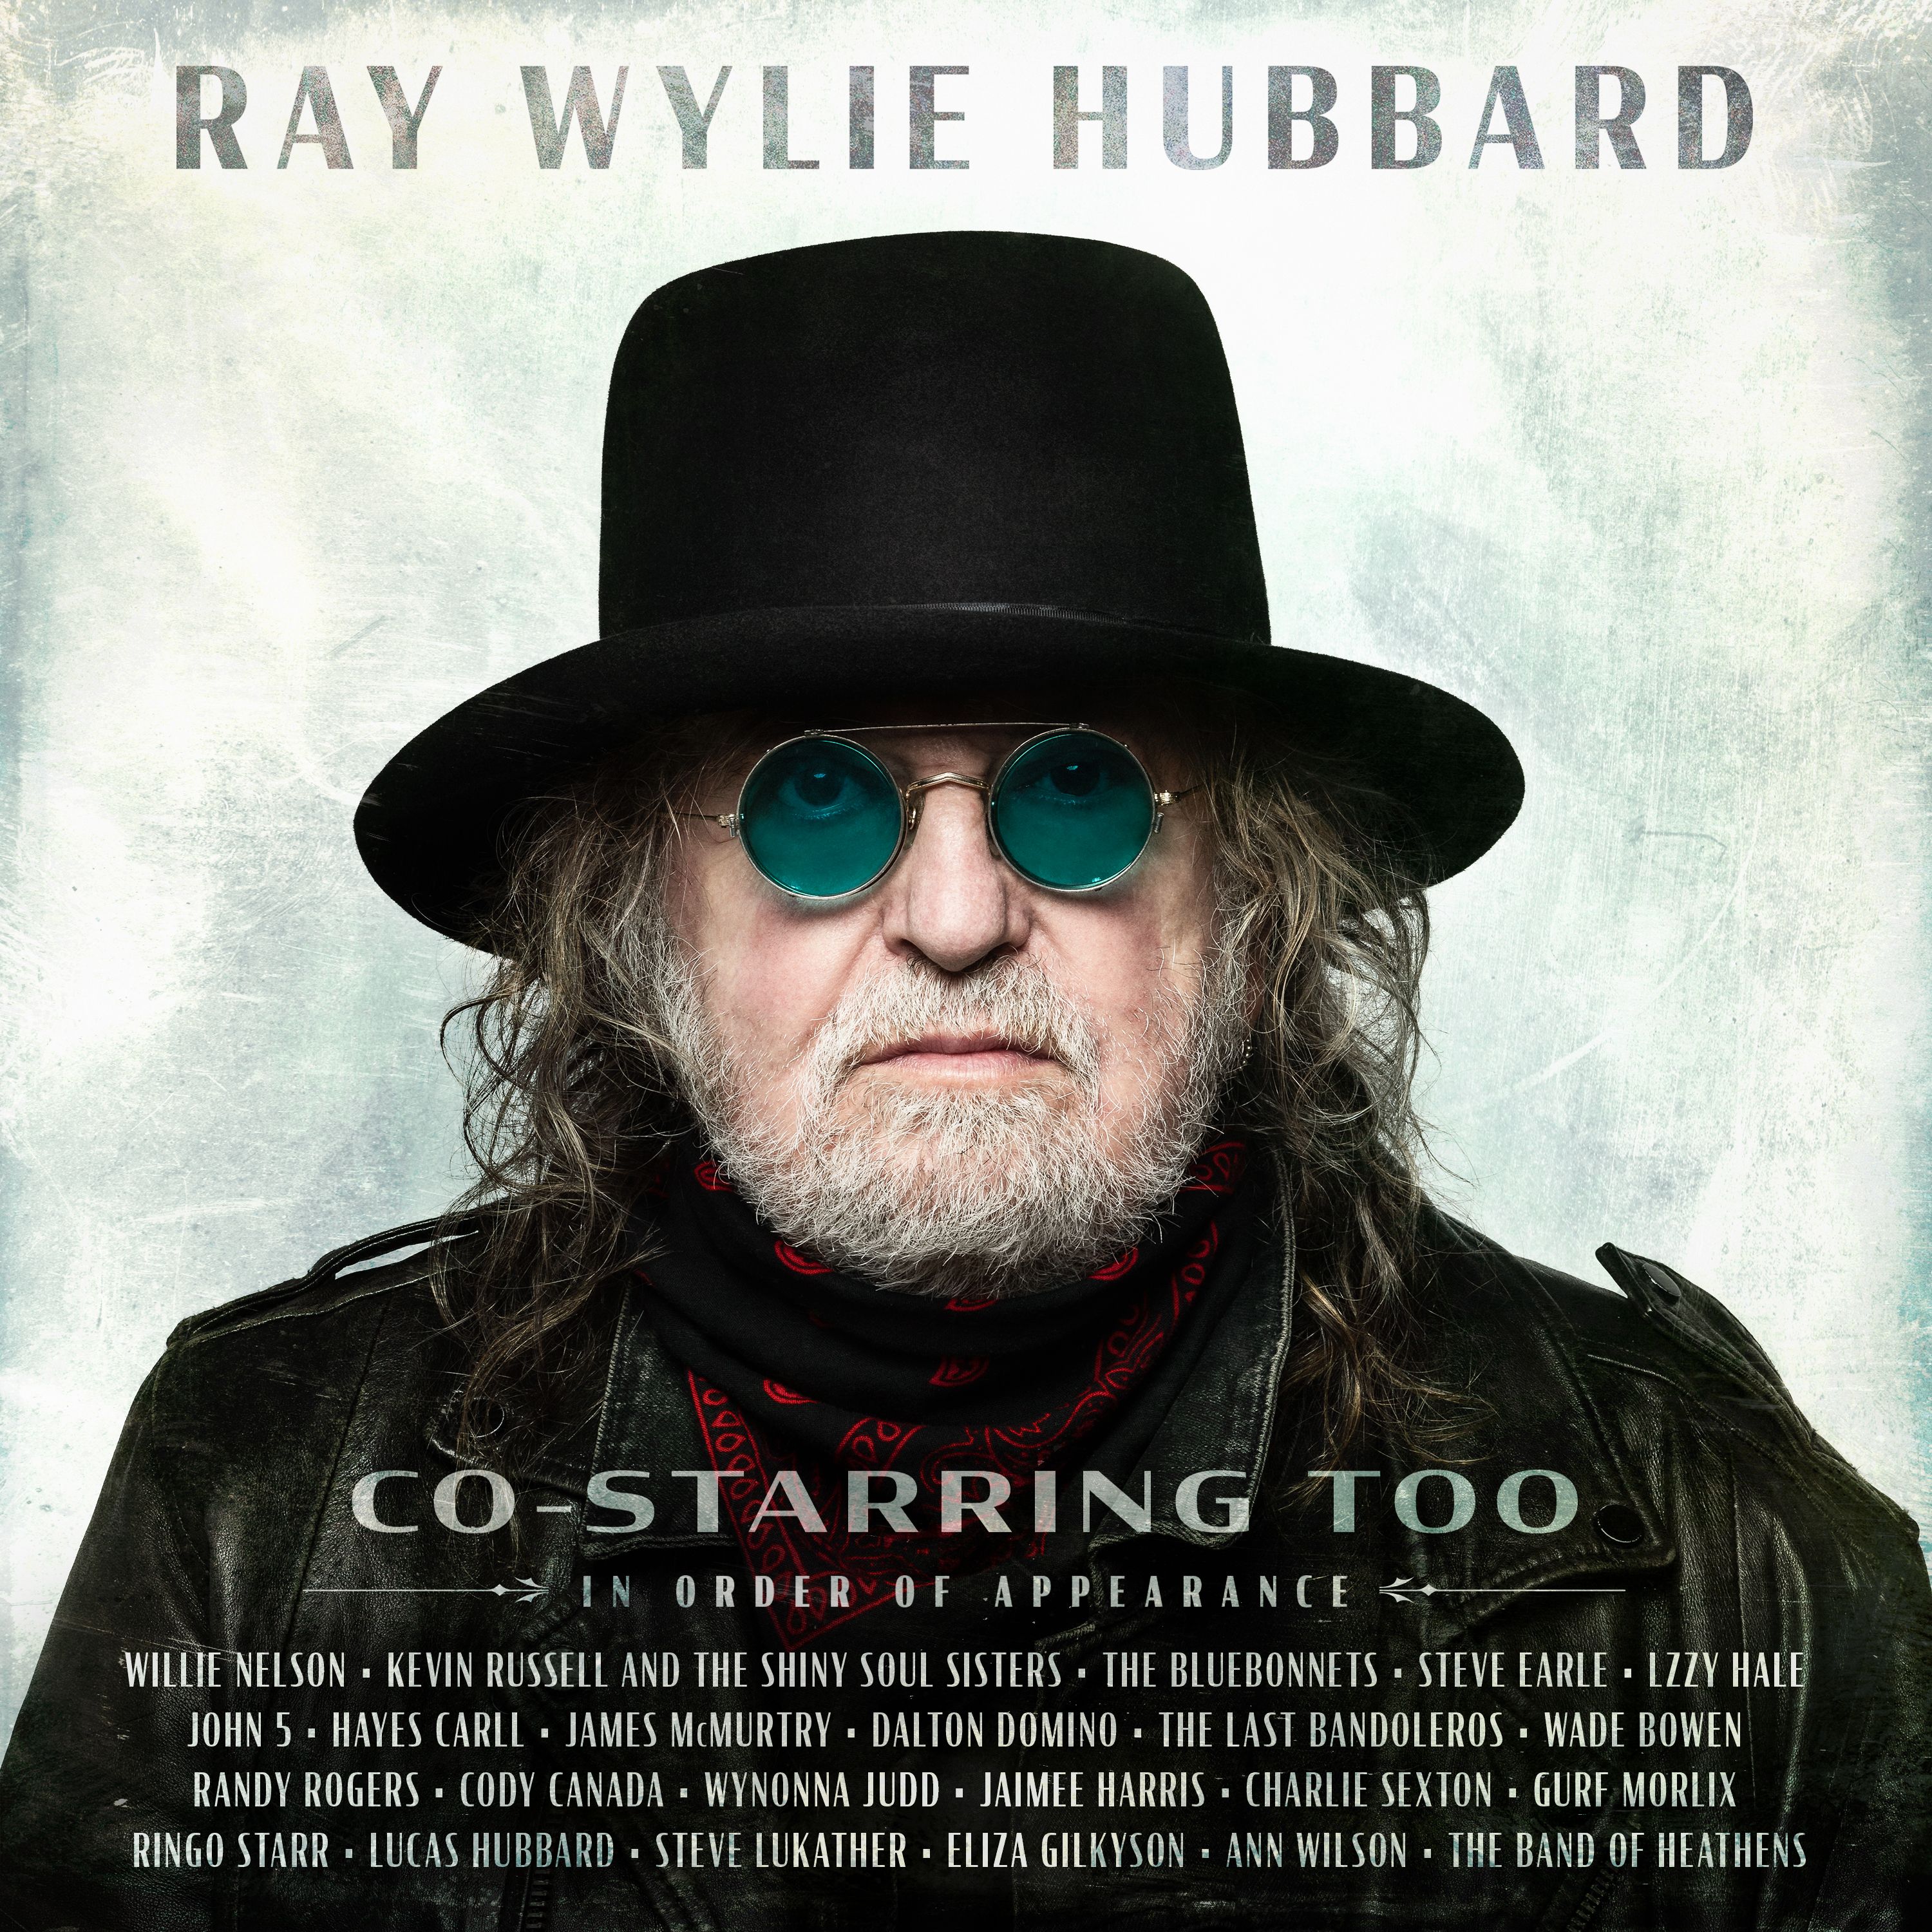 Ray Wylie Hubbard - Co-Starring Too Album Cover